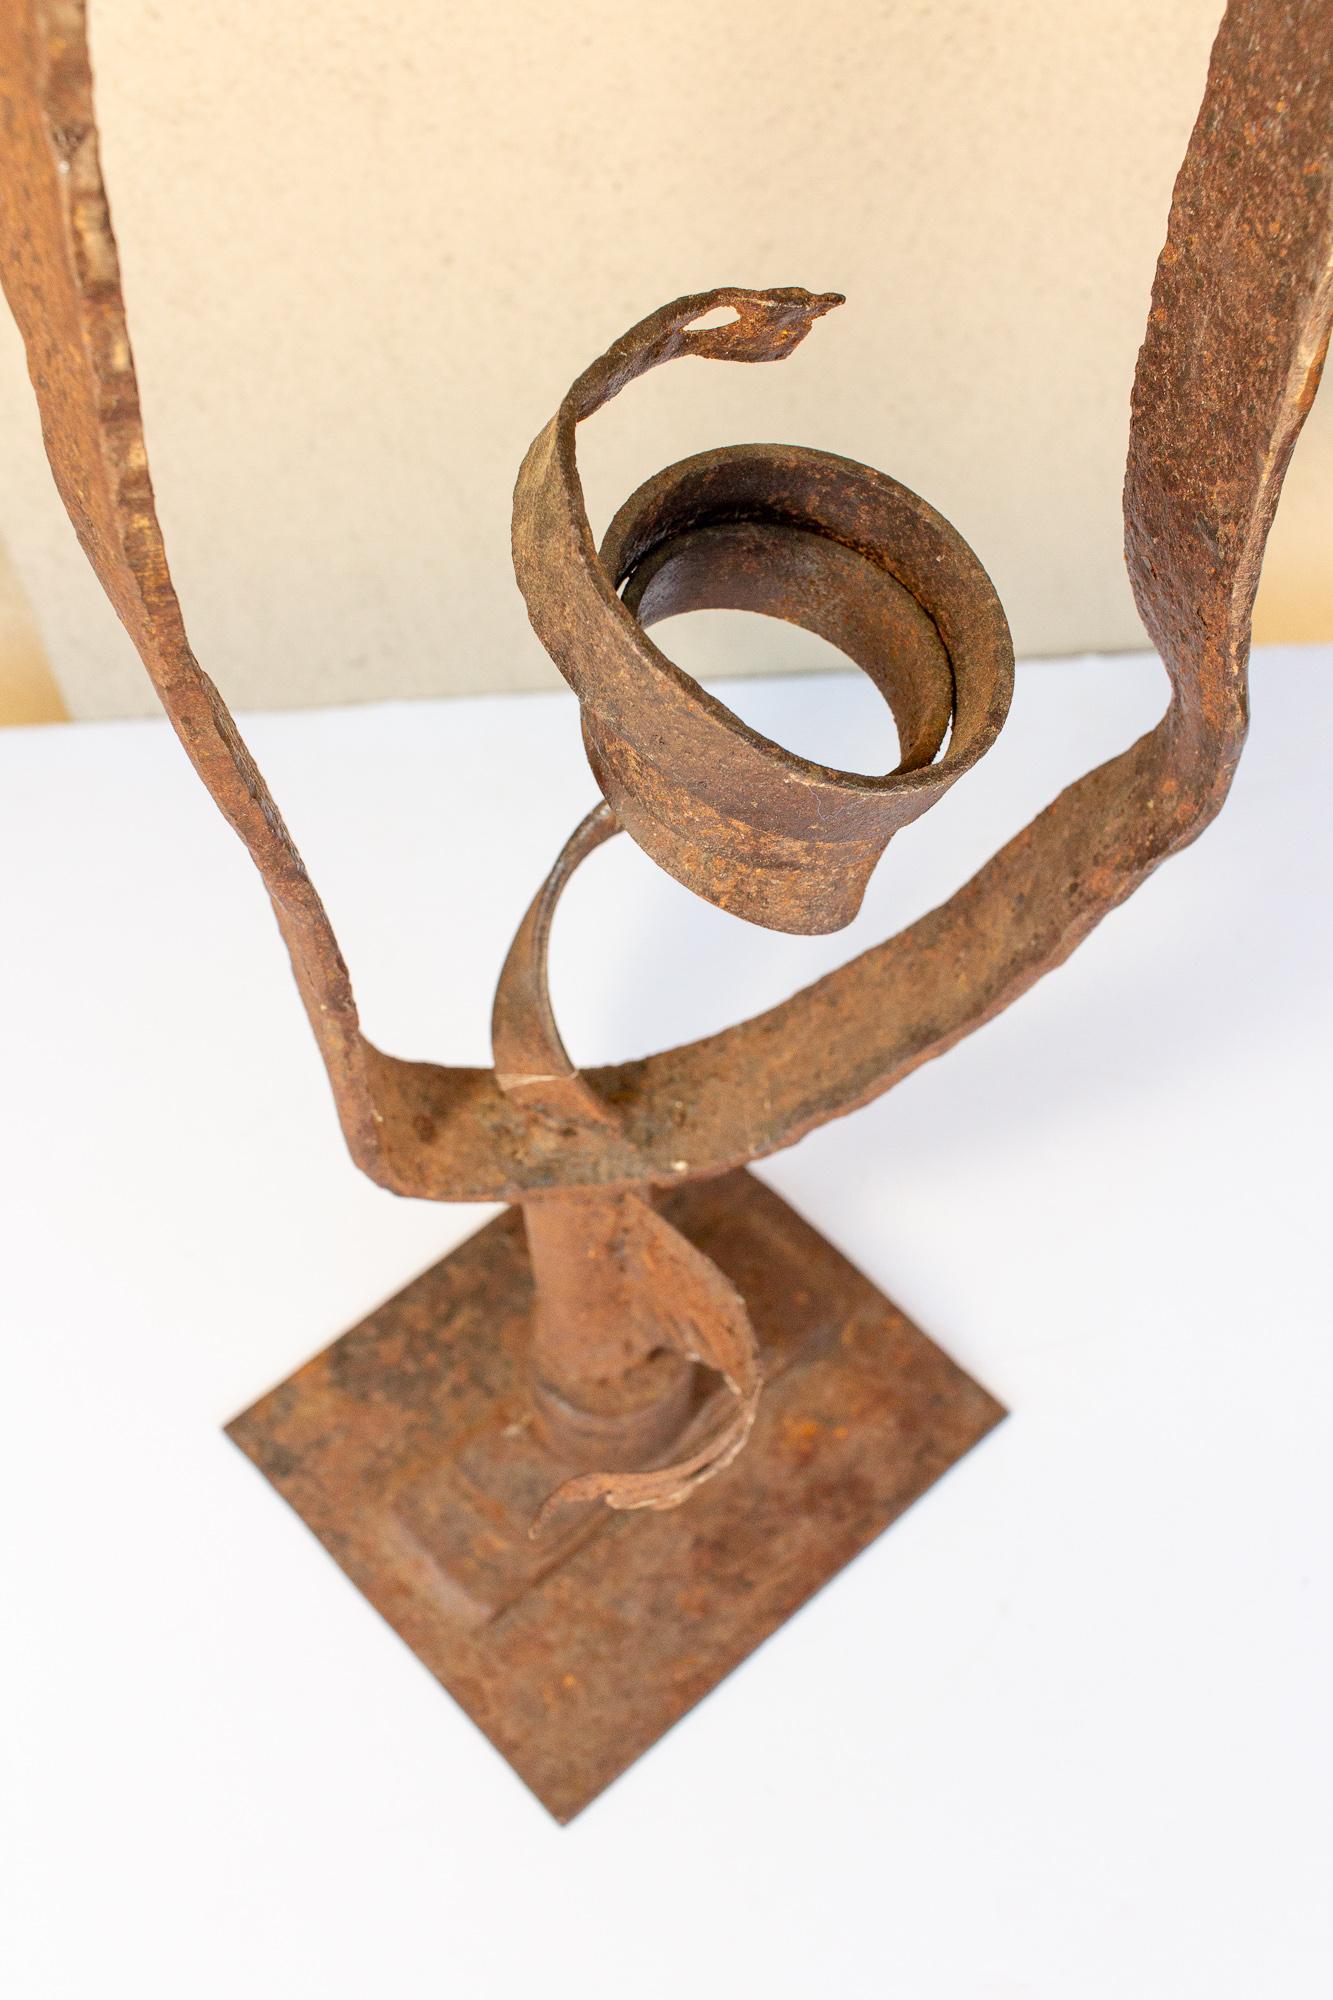 Midcentury Abstract Iron Sculpture found in France 1